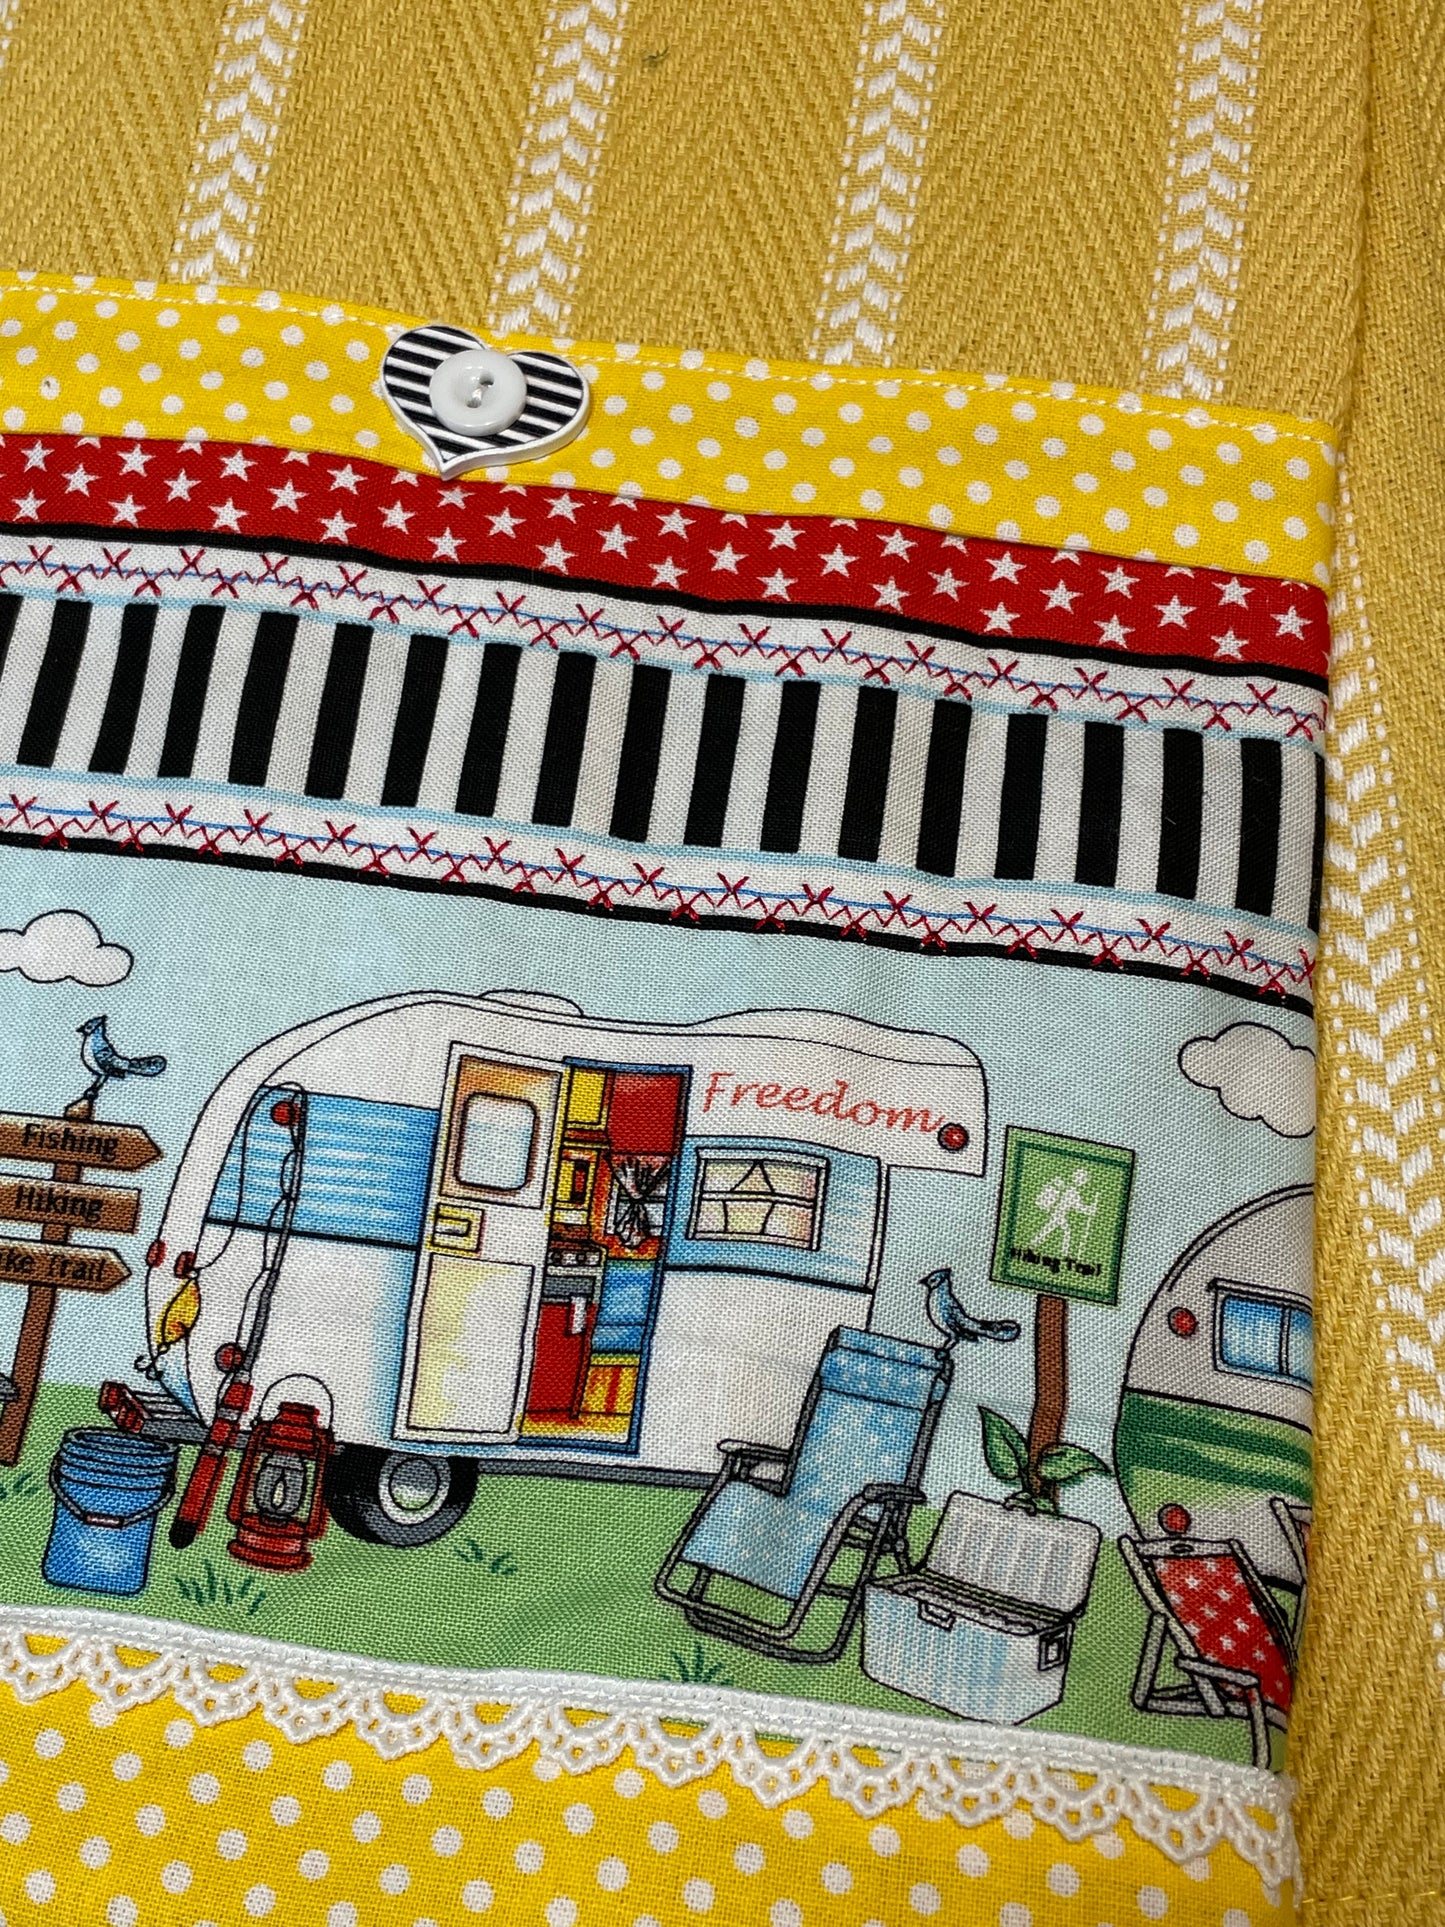 Glaming Decor Idea. Dress up your RV, Travel Trailer or Cabin with cute dish towles featuring retro campers. Yellow and white striped towel with red, white and black details. Handcrafted in Canada. Part of a collection of coordinating decor items. Shop the entire collection online. Find me at a local Farmers Market or follow along on the Home Stitchery Decor YouTube Channel. 